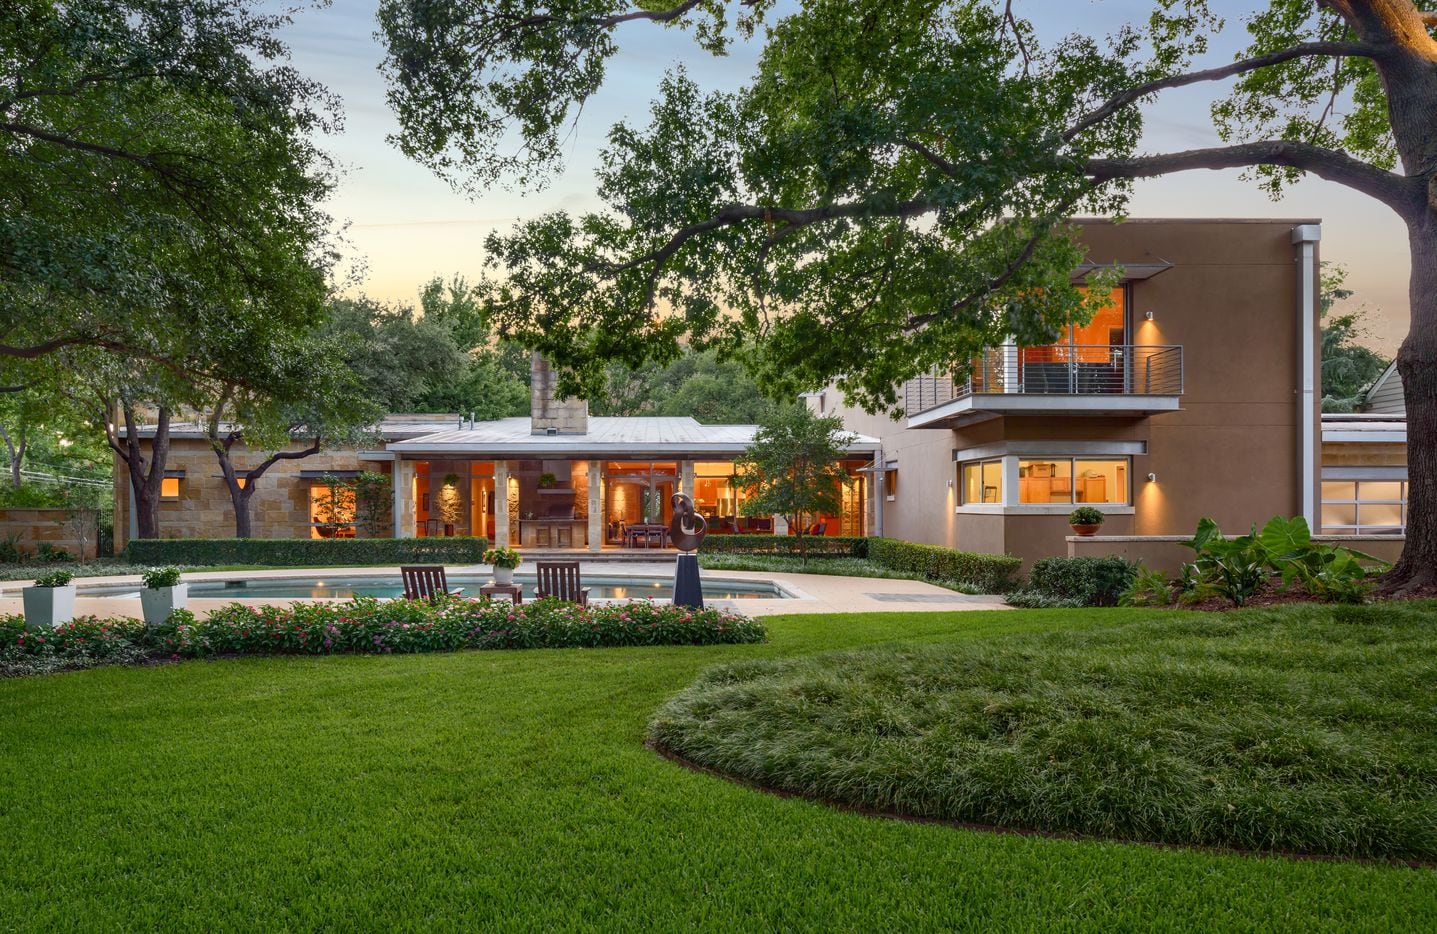 This 6,886-square-foot house at 5006 Shadywood in Dallas' Bluffview neighborhood was built for sustainable living by Ralph Hawkins, former president and CEO of architecture firm HKS Inc.